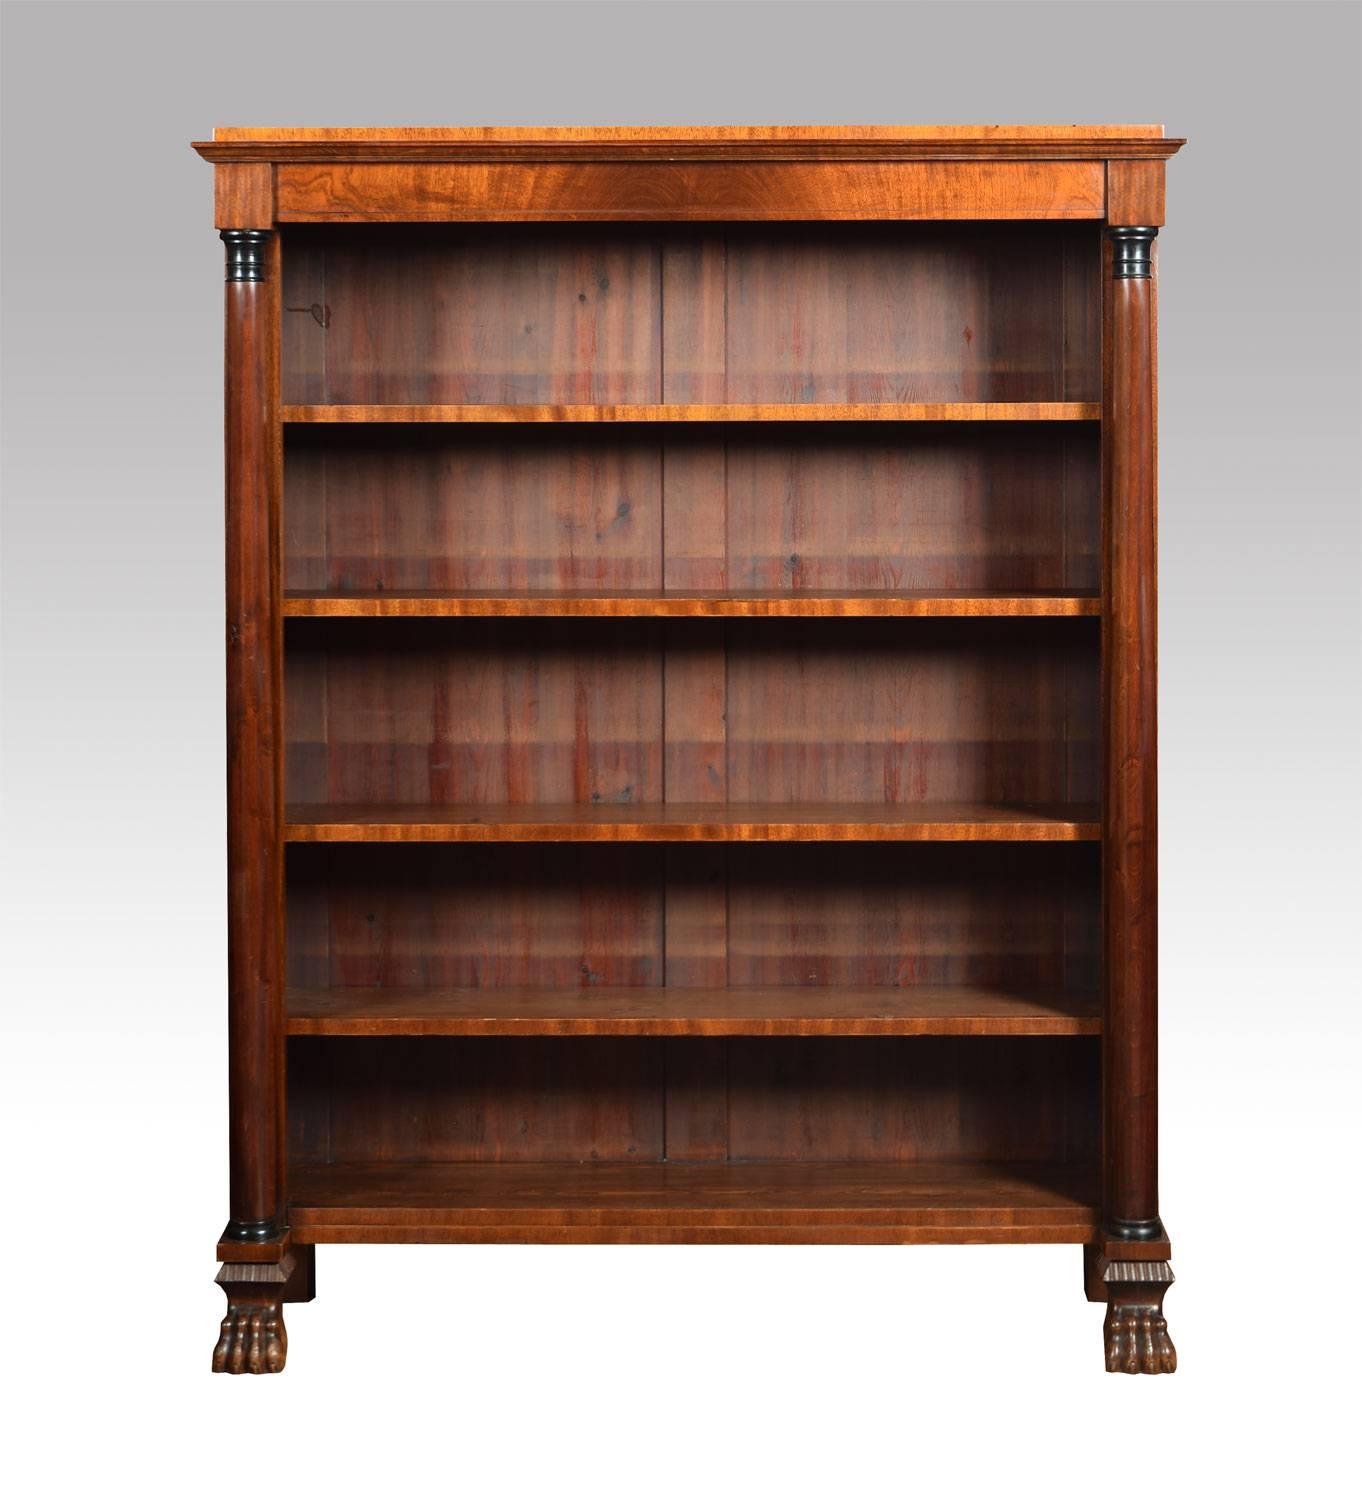 Pair of French Empire style mahogany open bookcases the rectangular tops supported by turned columns with ebony capitals, each bookcase having four adjustable shelves. All raised up on claw feet.

Dimensions:

Height 59.5 inches,

width 47.5